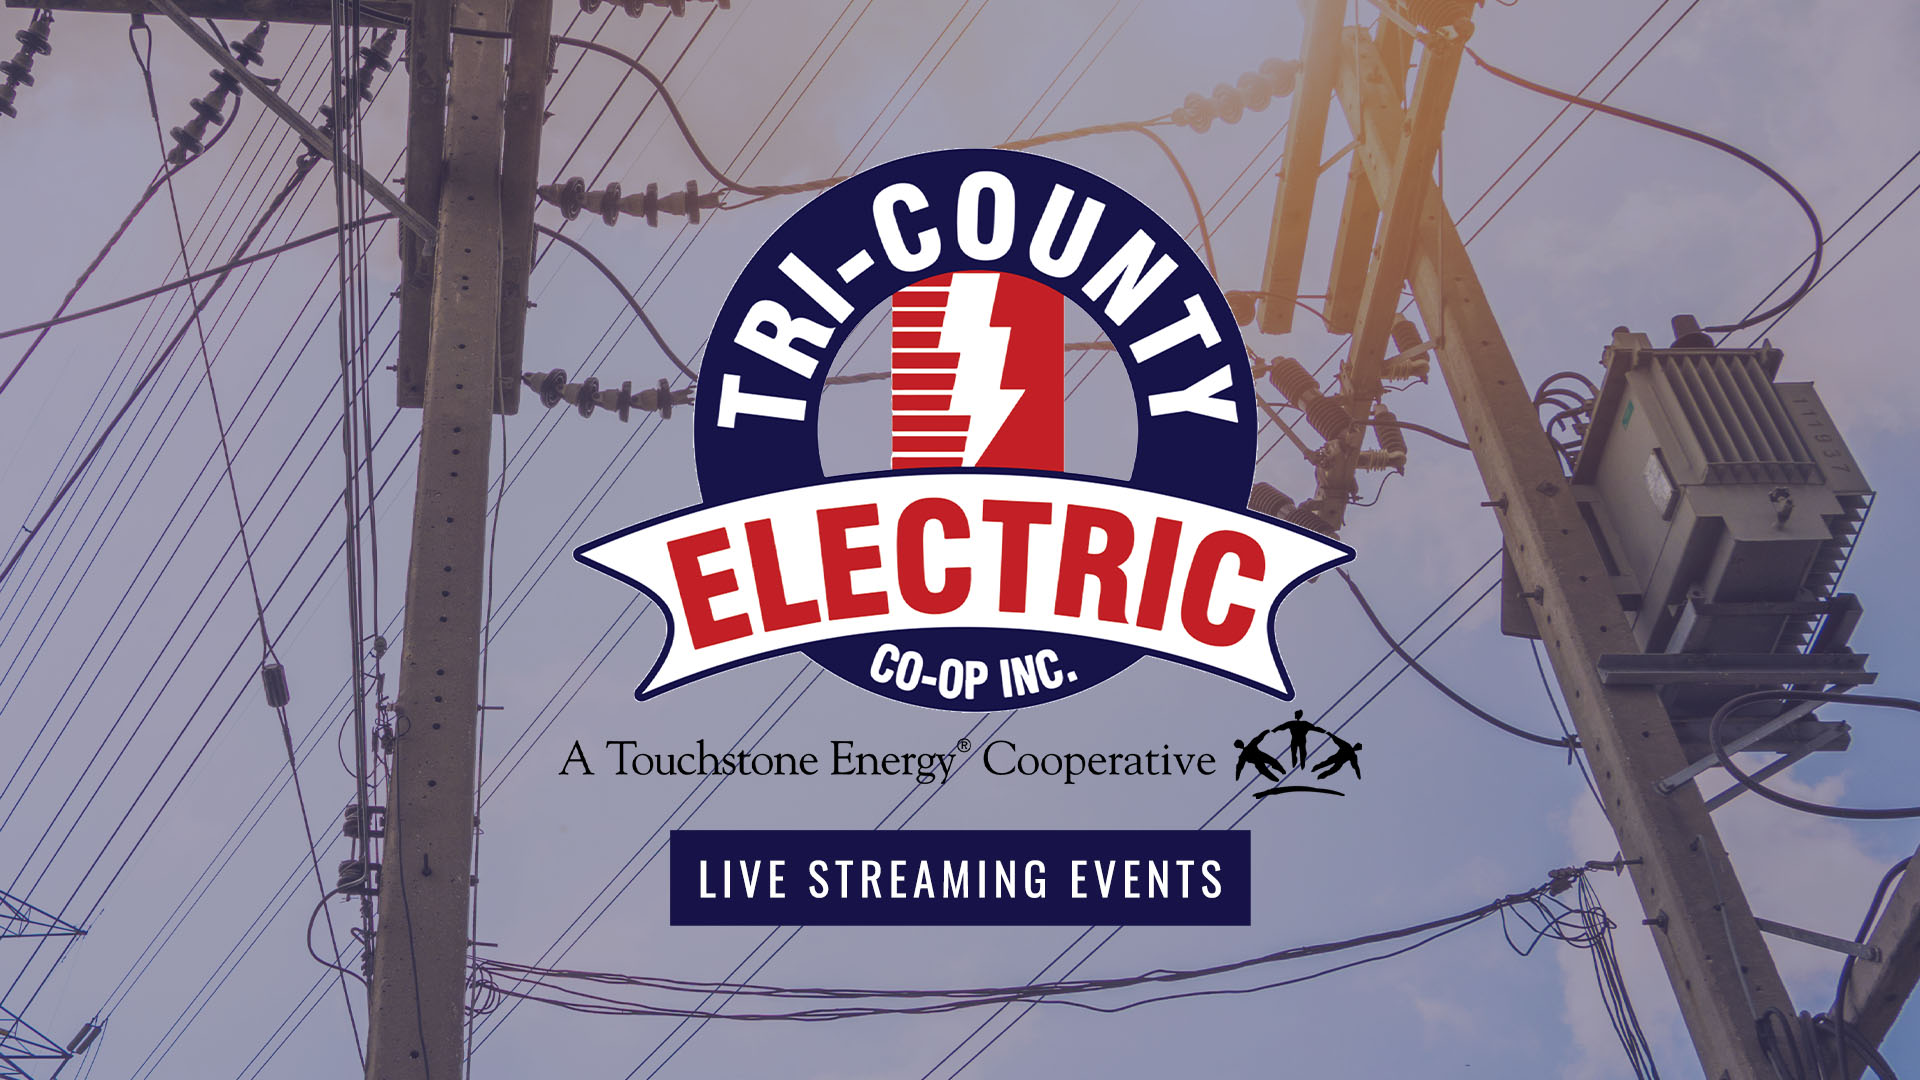 Tri-County Electric Cooperative (Employees)